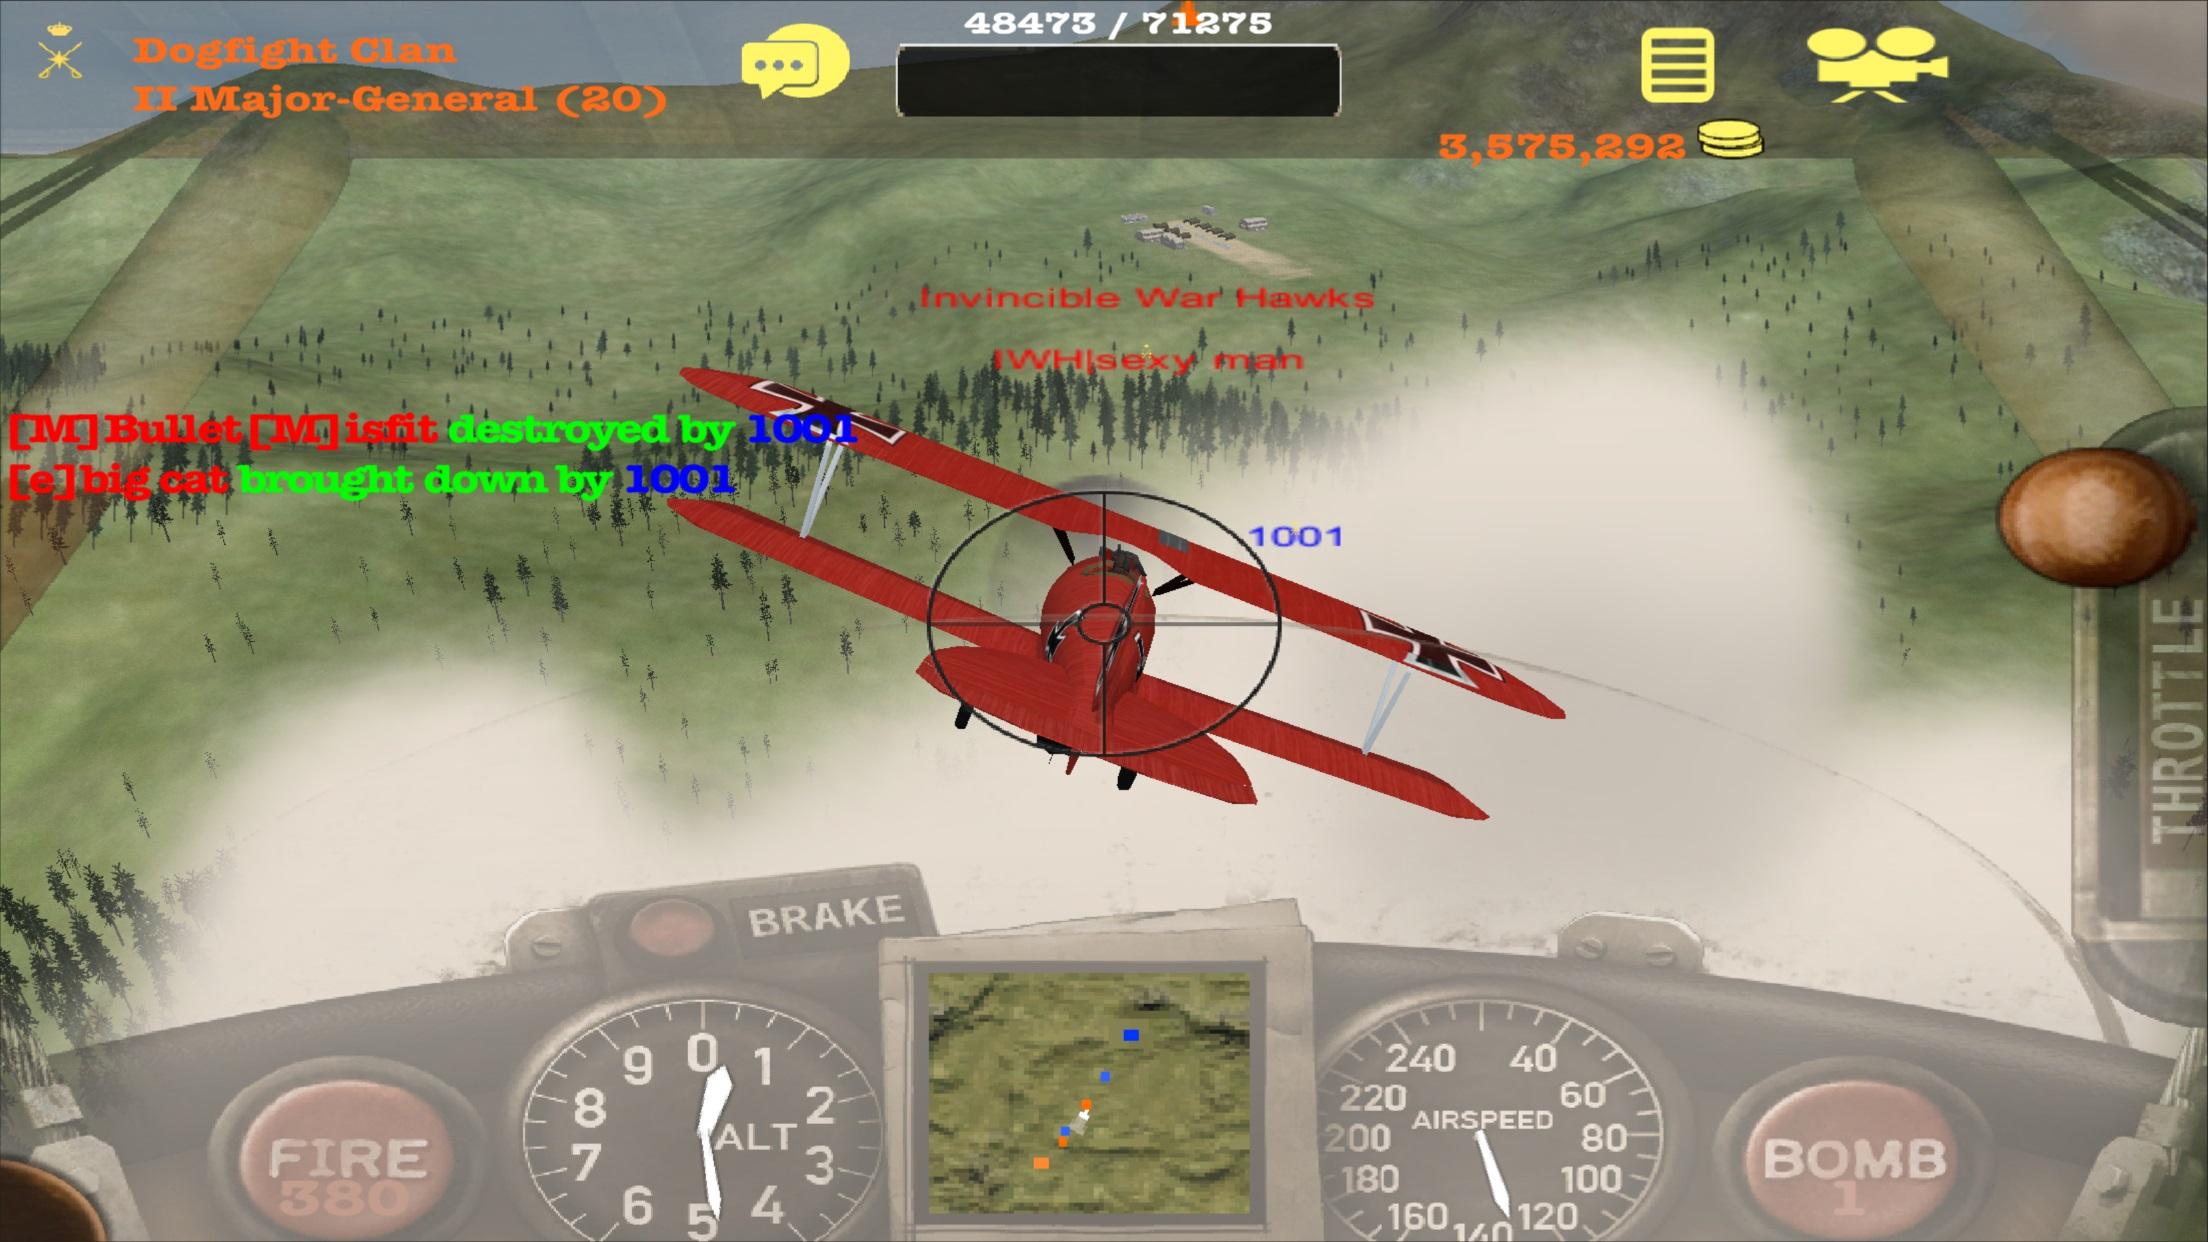 Android application Dogfight Elite screenshort